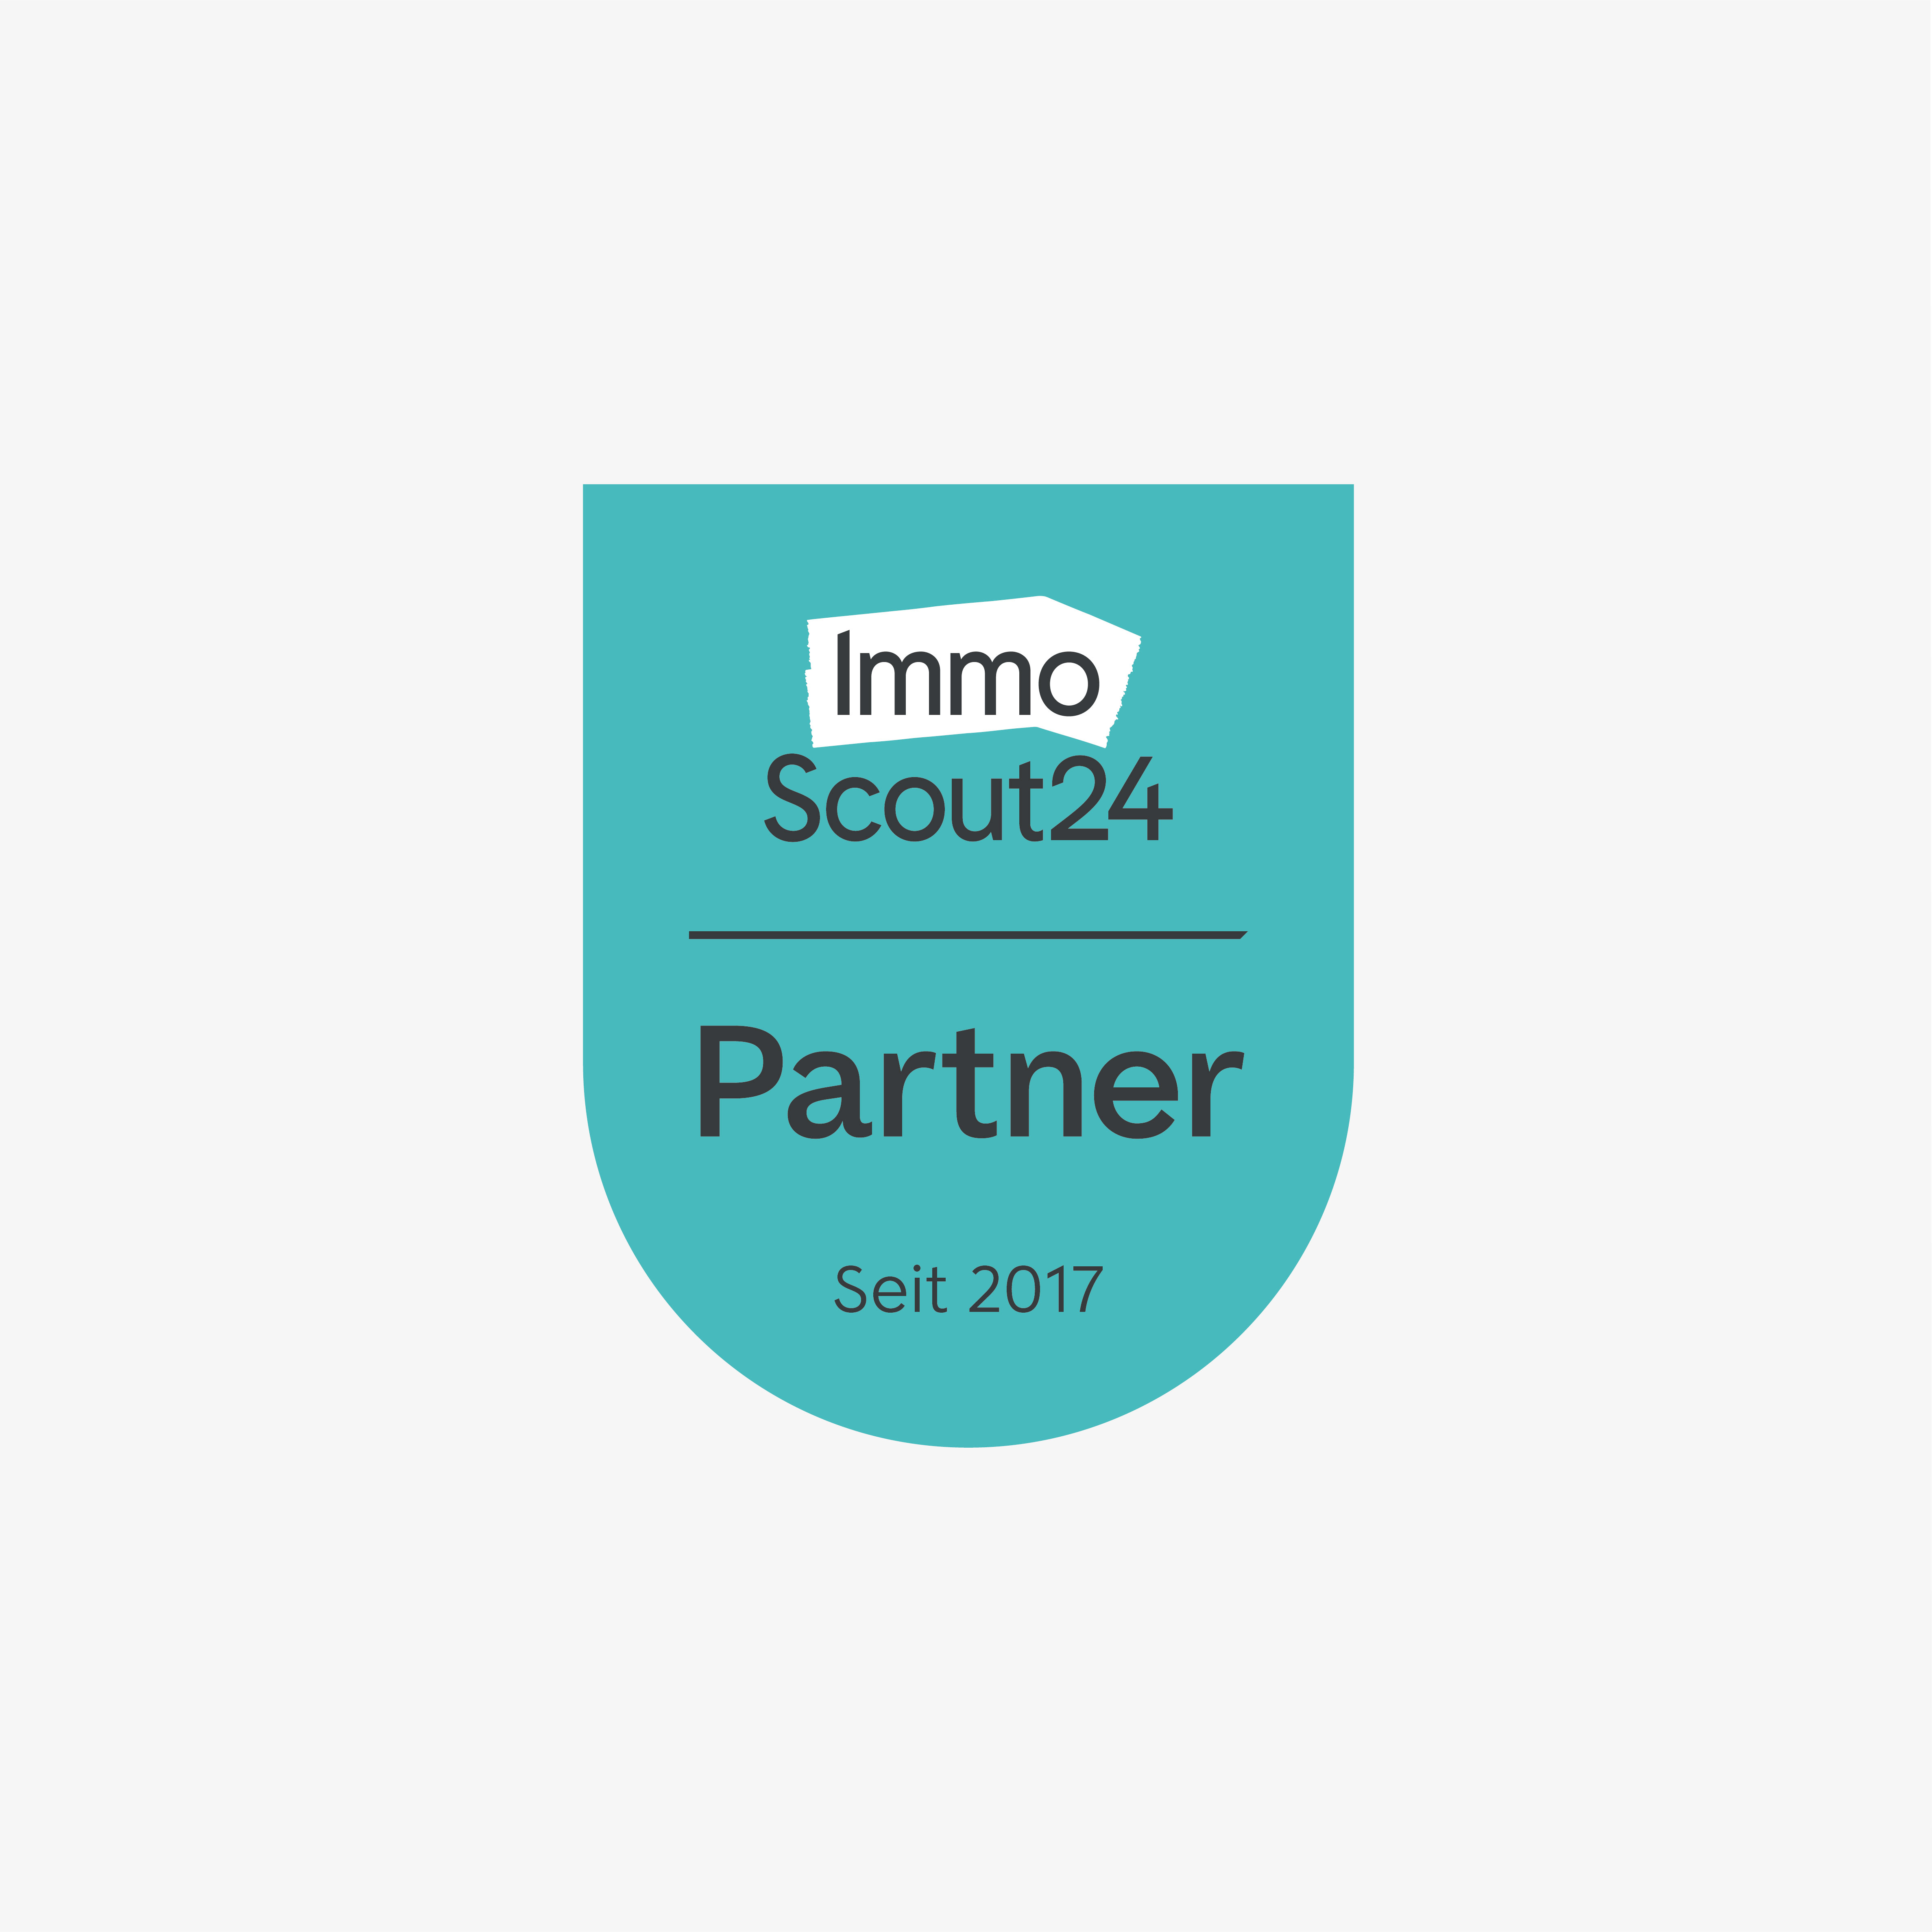 Immoscout 24 Partner